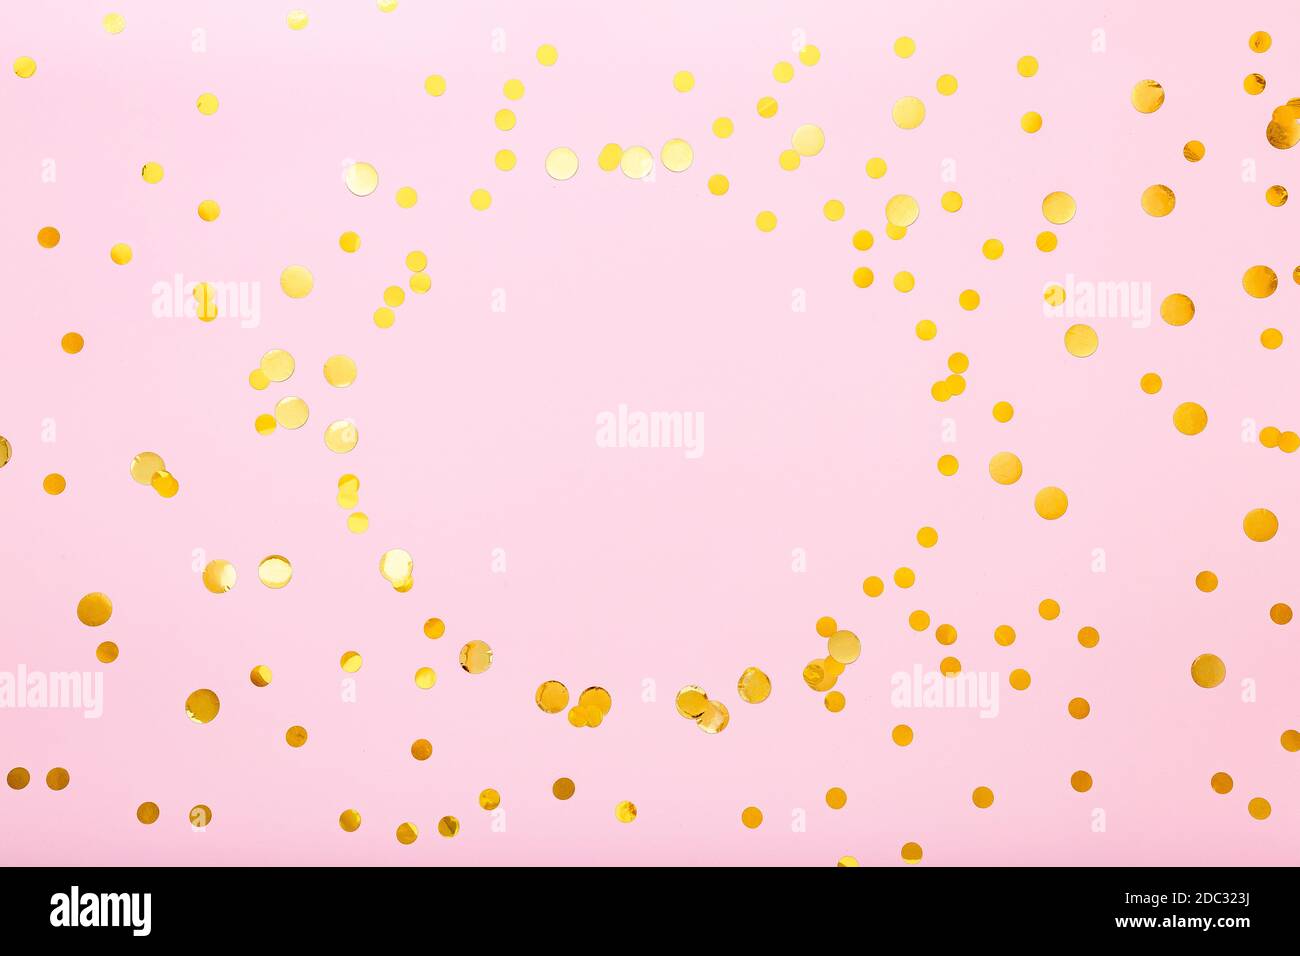 Gold confetti sparkles frame on pink background. Flat lay, top view festive backdrop with circle copy space. Celebration concept. Stock Photo